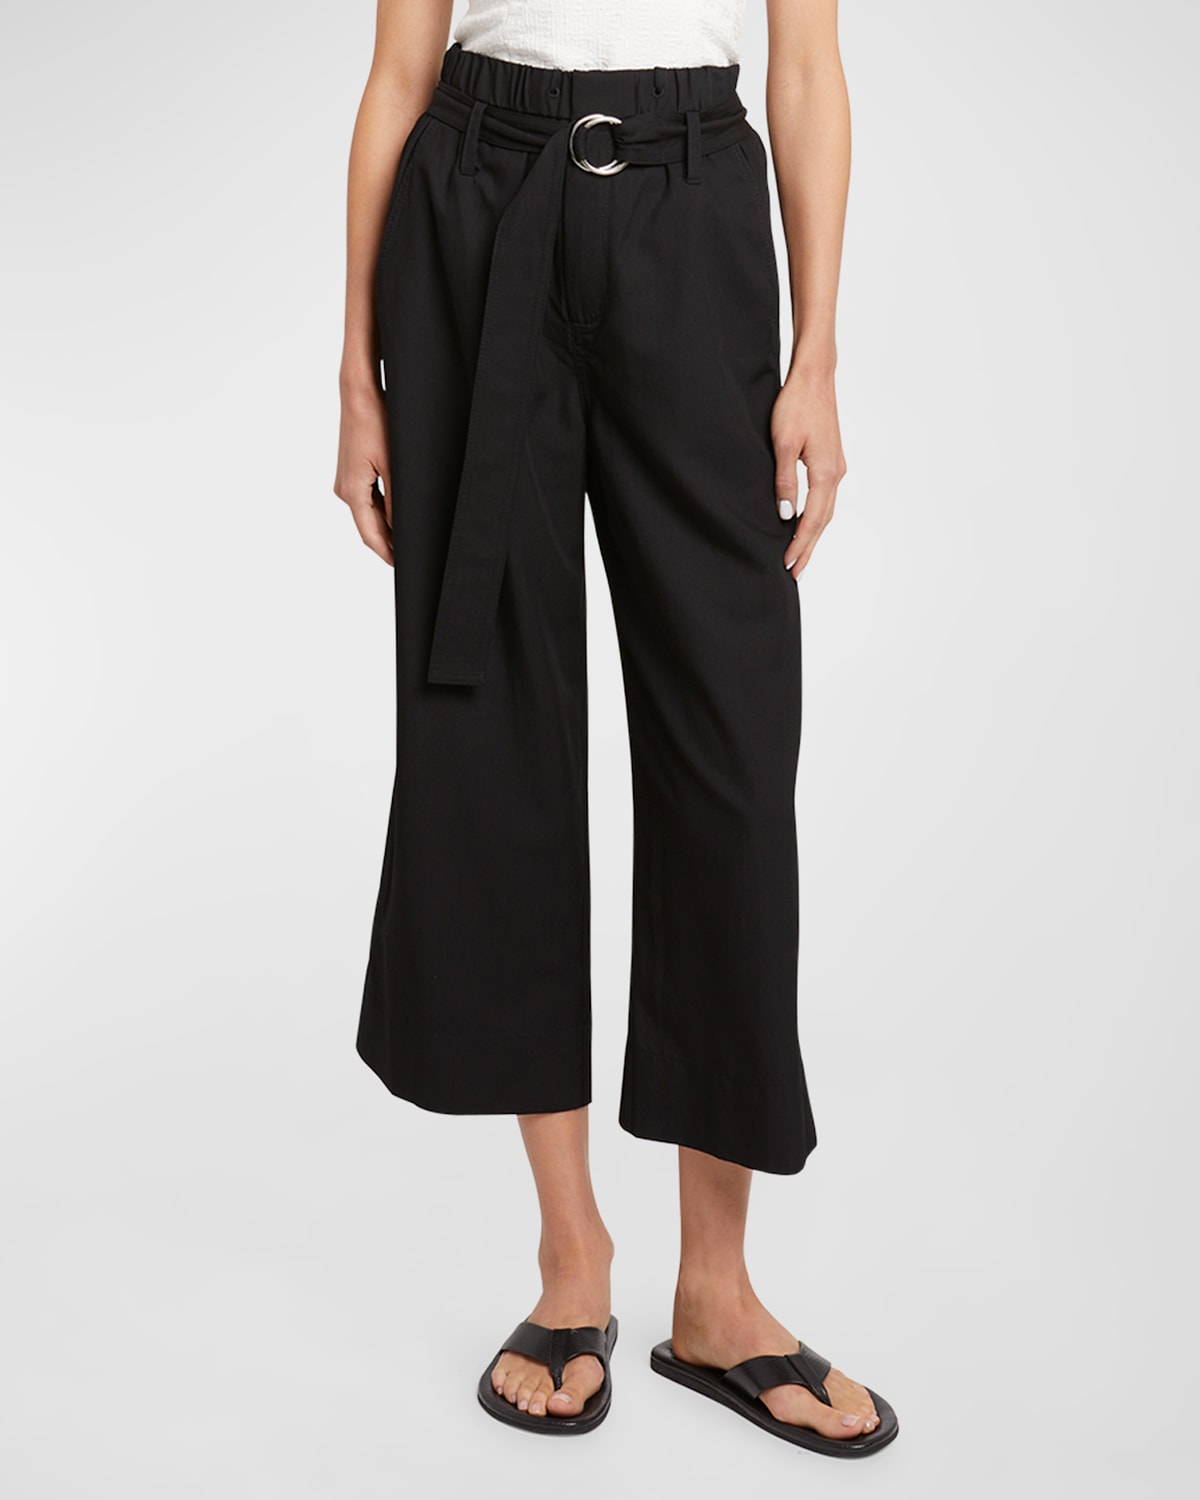 Proenza Schouler White Label Brooke Drapey Belted Suiting Trousers In Black